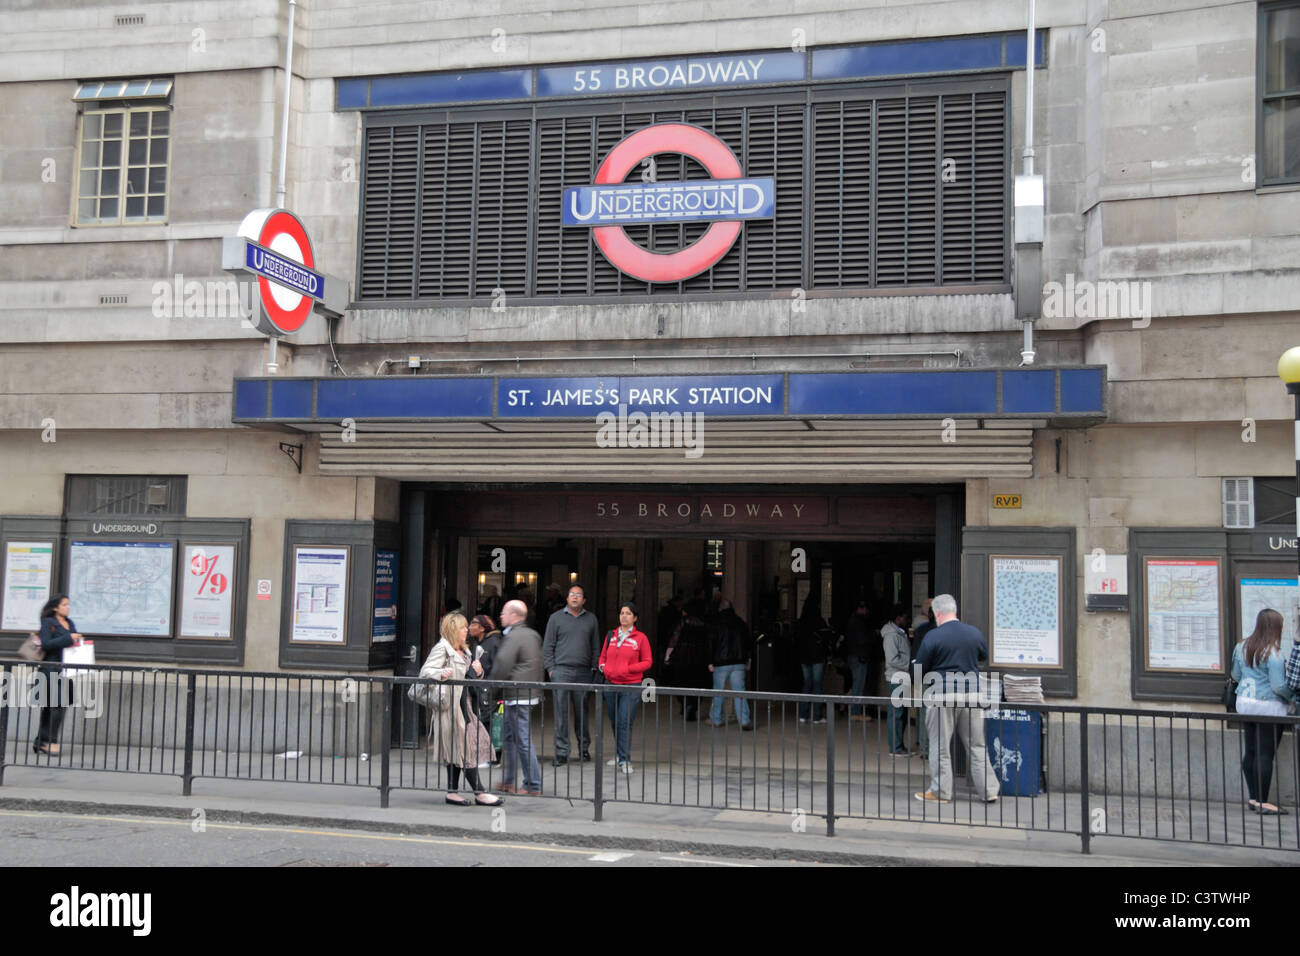 One entrance to St James Park underground station, Petty France, London, UK.  The HQ of London Transport is above this station. Stock Photo